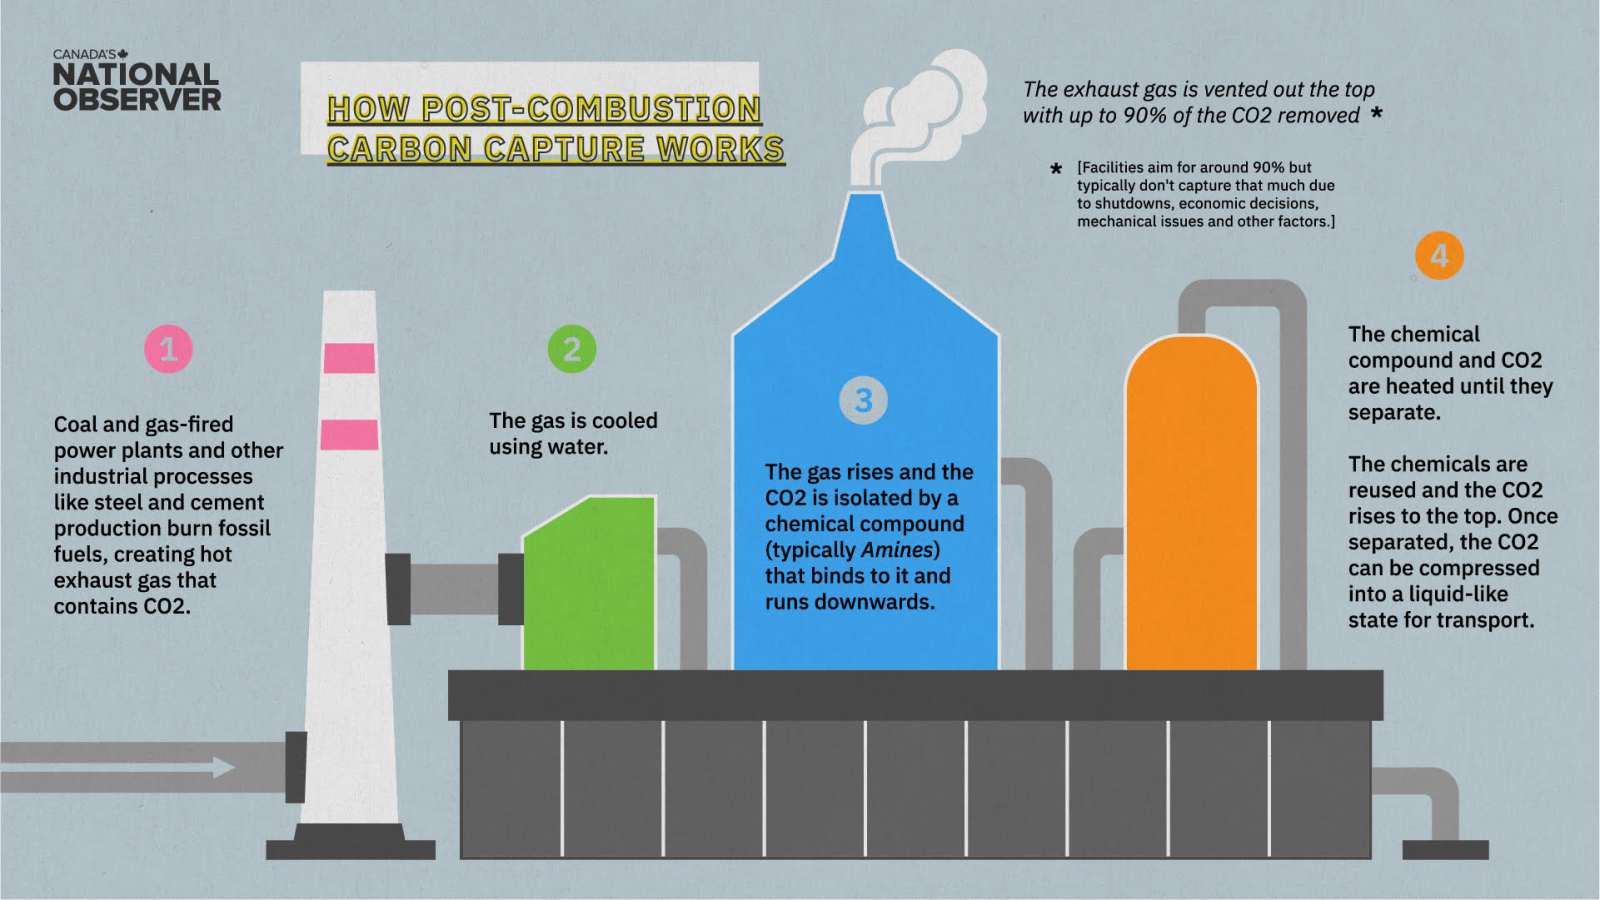 A colourful graphic that shows the steps of post-combustion carbon capture. Exhaust gas is cooled with water and then a chemical solution binds to CO2 molecules, isoalting the CO2 from the exhasut gas. The chemical-CO2 solution is heated to separate CO2